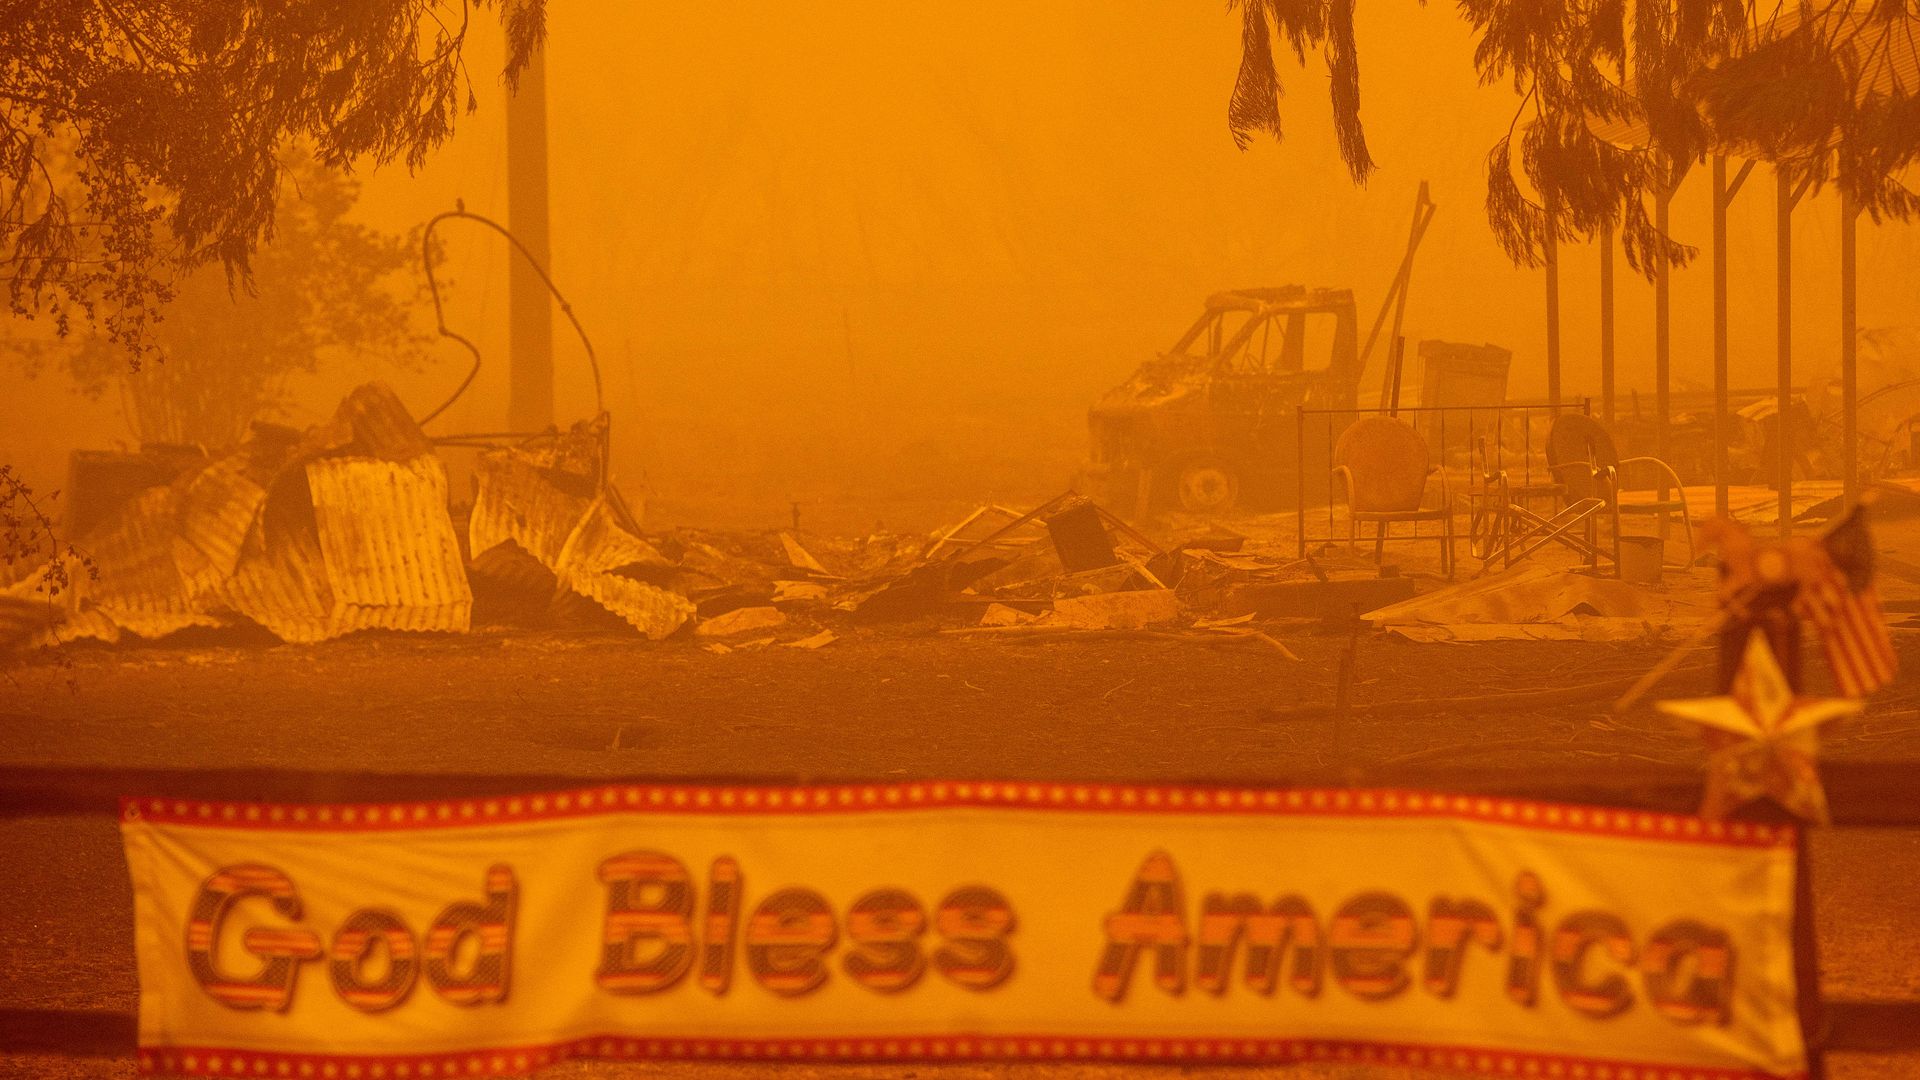 A patriotic banner is seen in front of a burned out property during the Dixie fire in Greenville, California on August 6